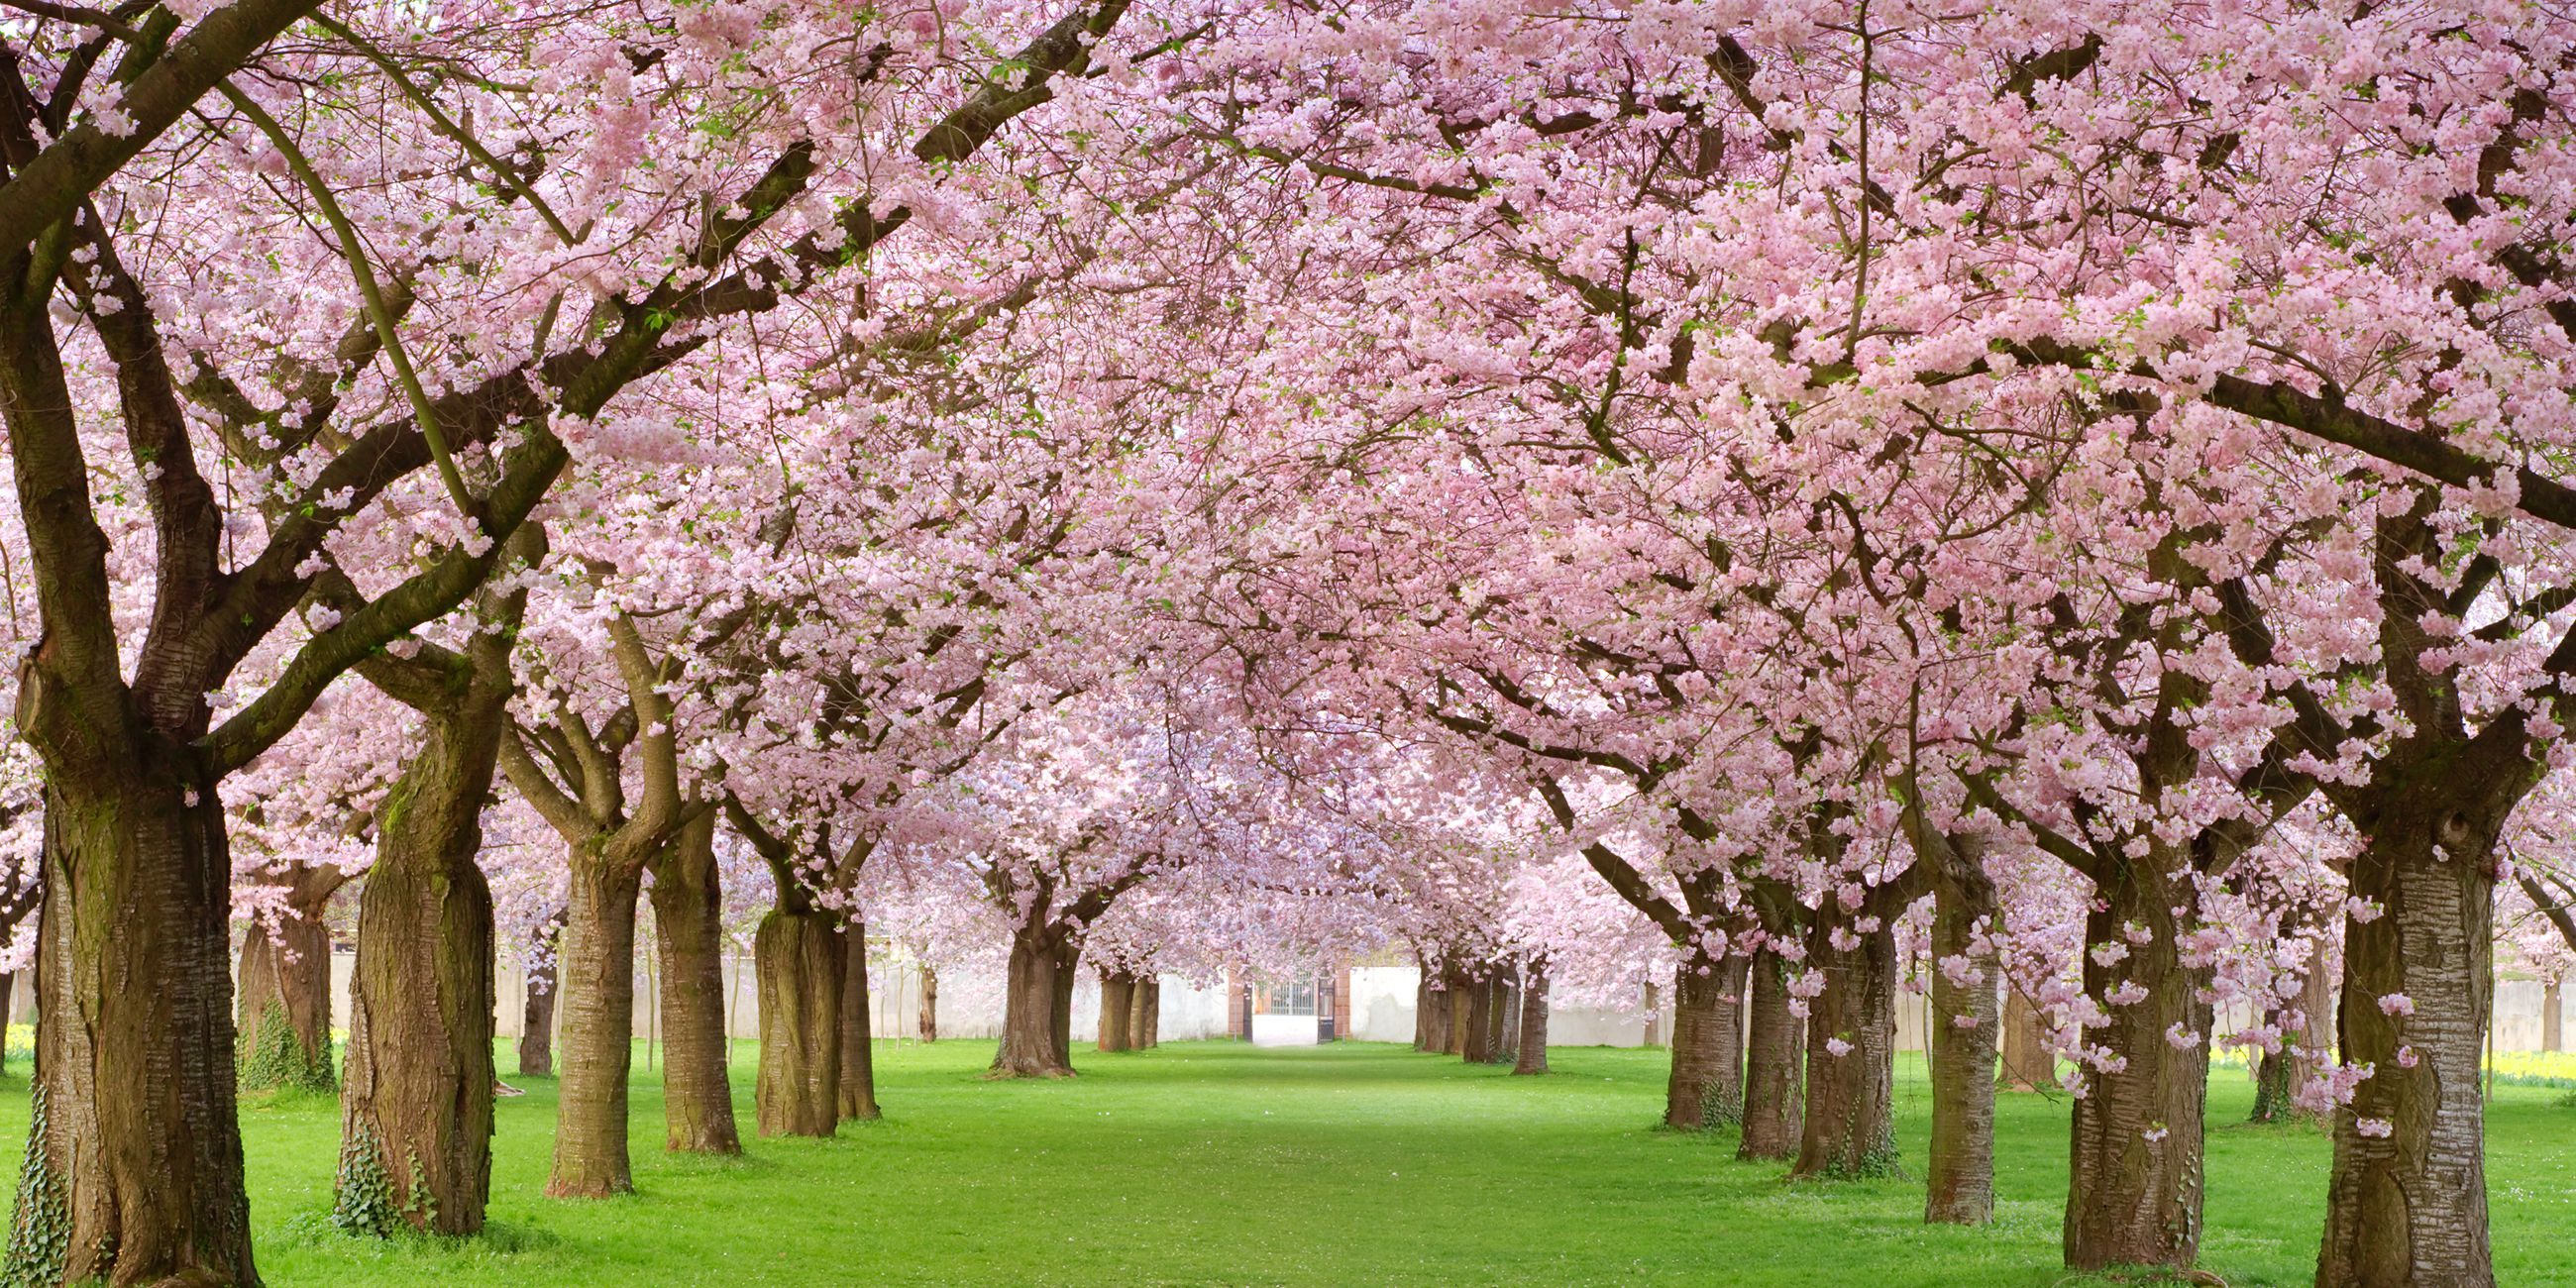 20 Cherry Blossom Tree Facts - Things You Didn't Know About Cherry ...